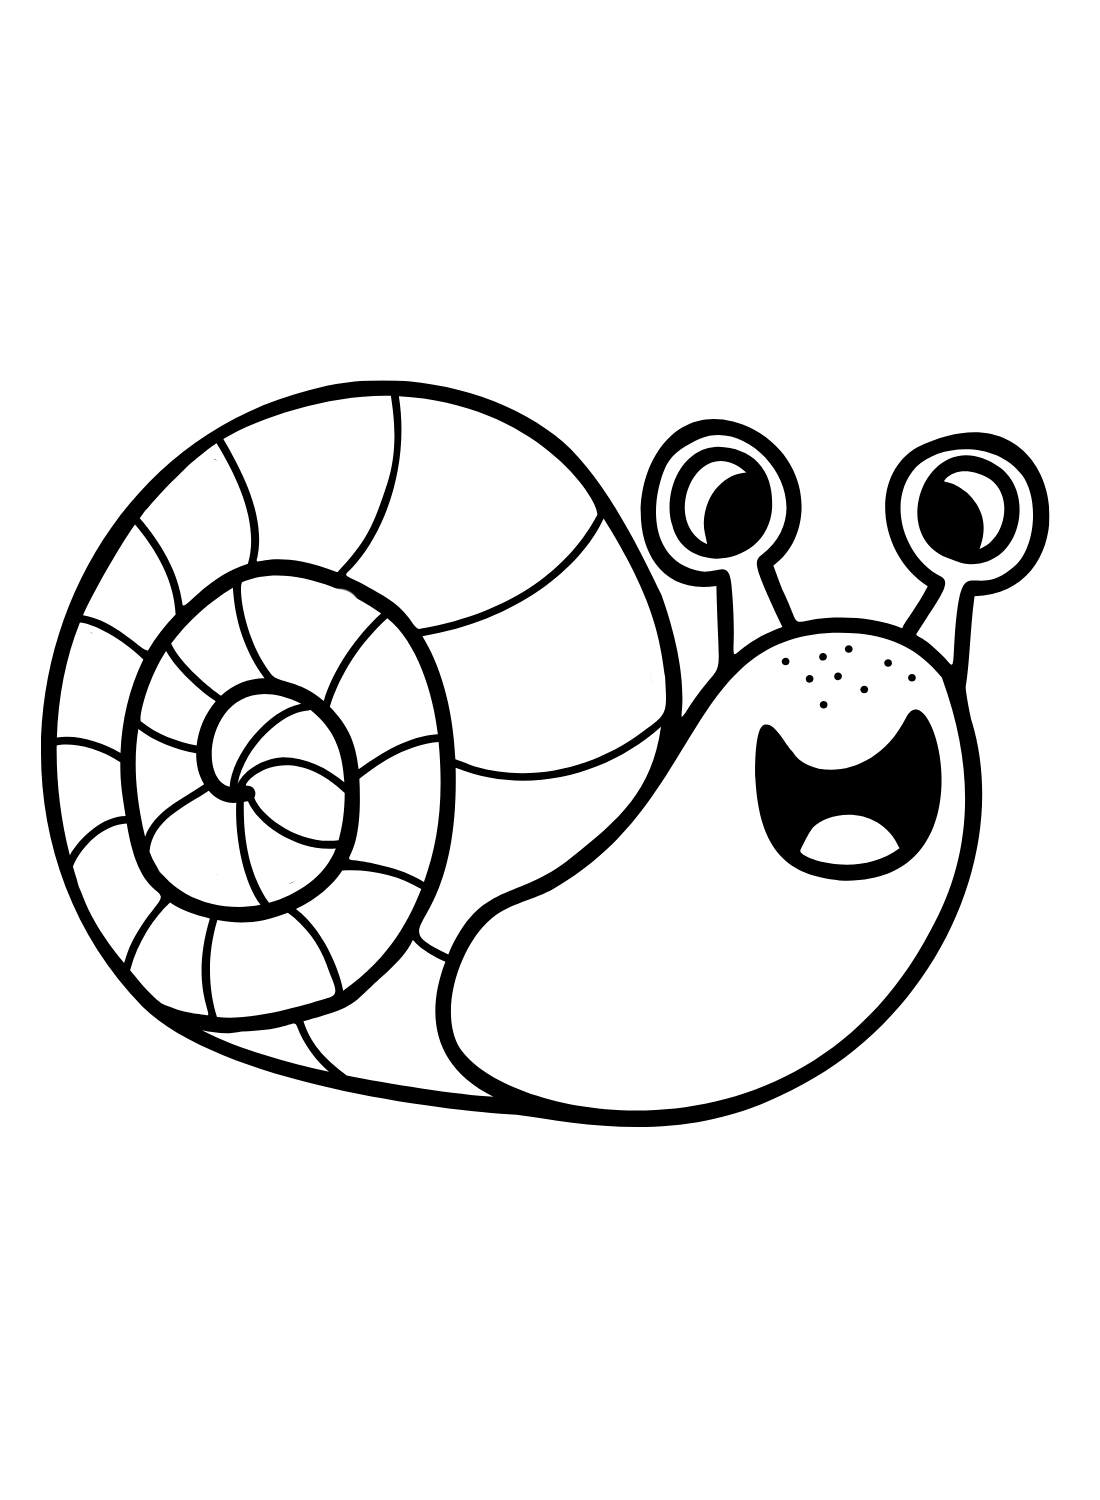 Snail coloring pages printable for free download